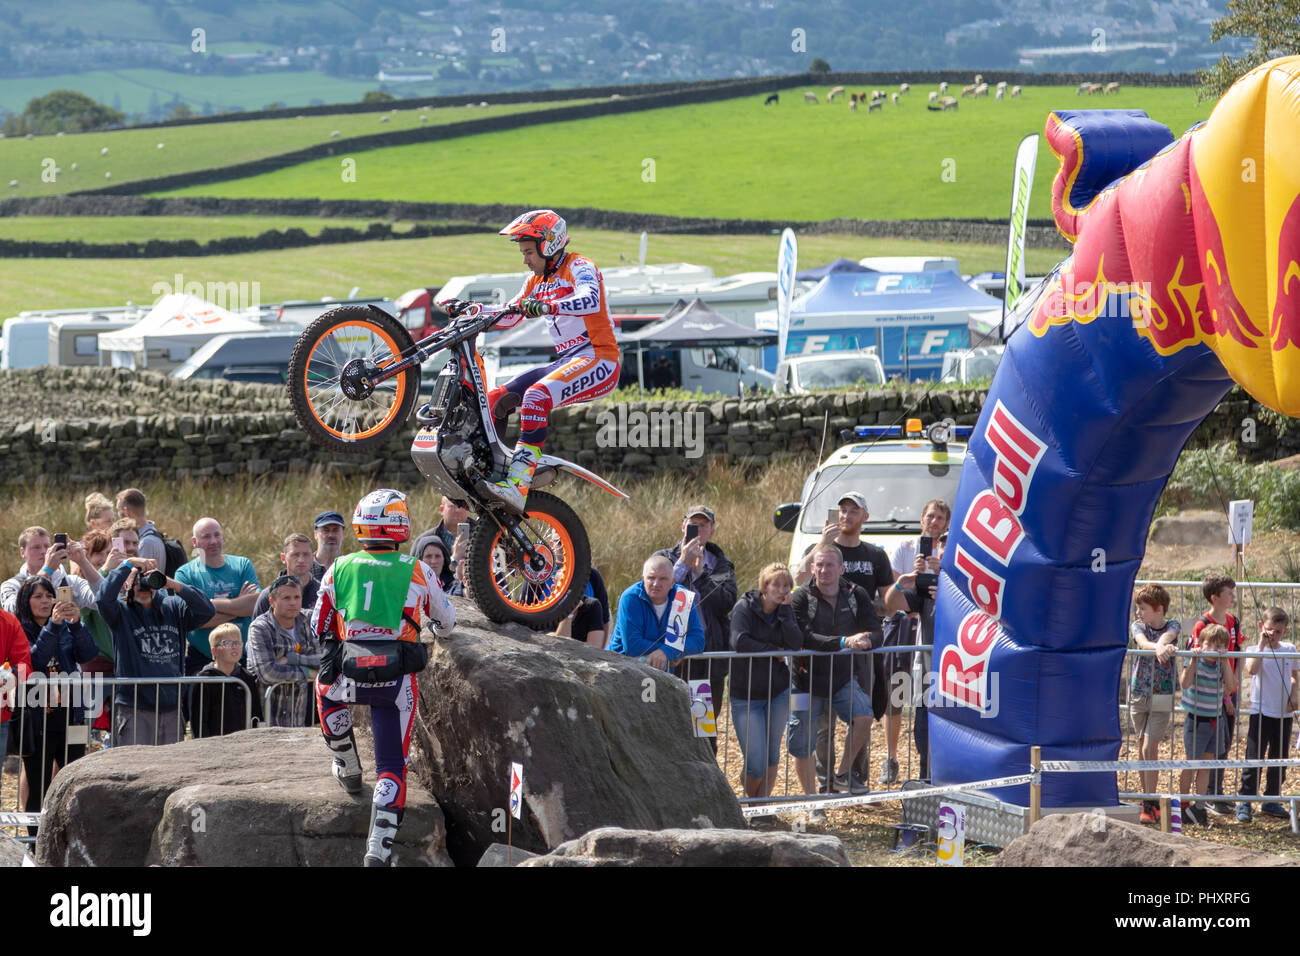 Silsden, UK. 2nd September 2018. The best International riders contest the British round of The World Trials GP. Results - First Place - Toni Bou. Second - Adam Raga. Third - Miquel Gelabert. Fourth - Takahisa Fujinami. Credit: RHB/Alamy Live News Stock Photo